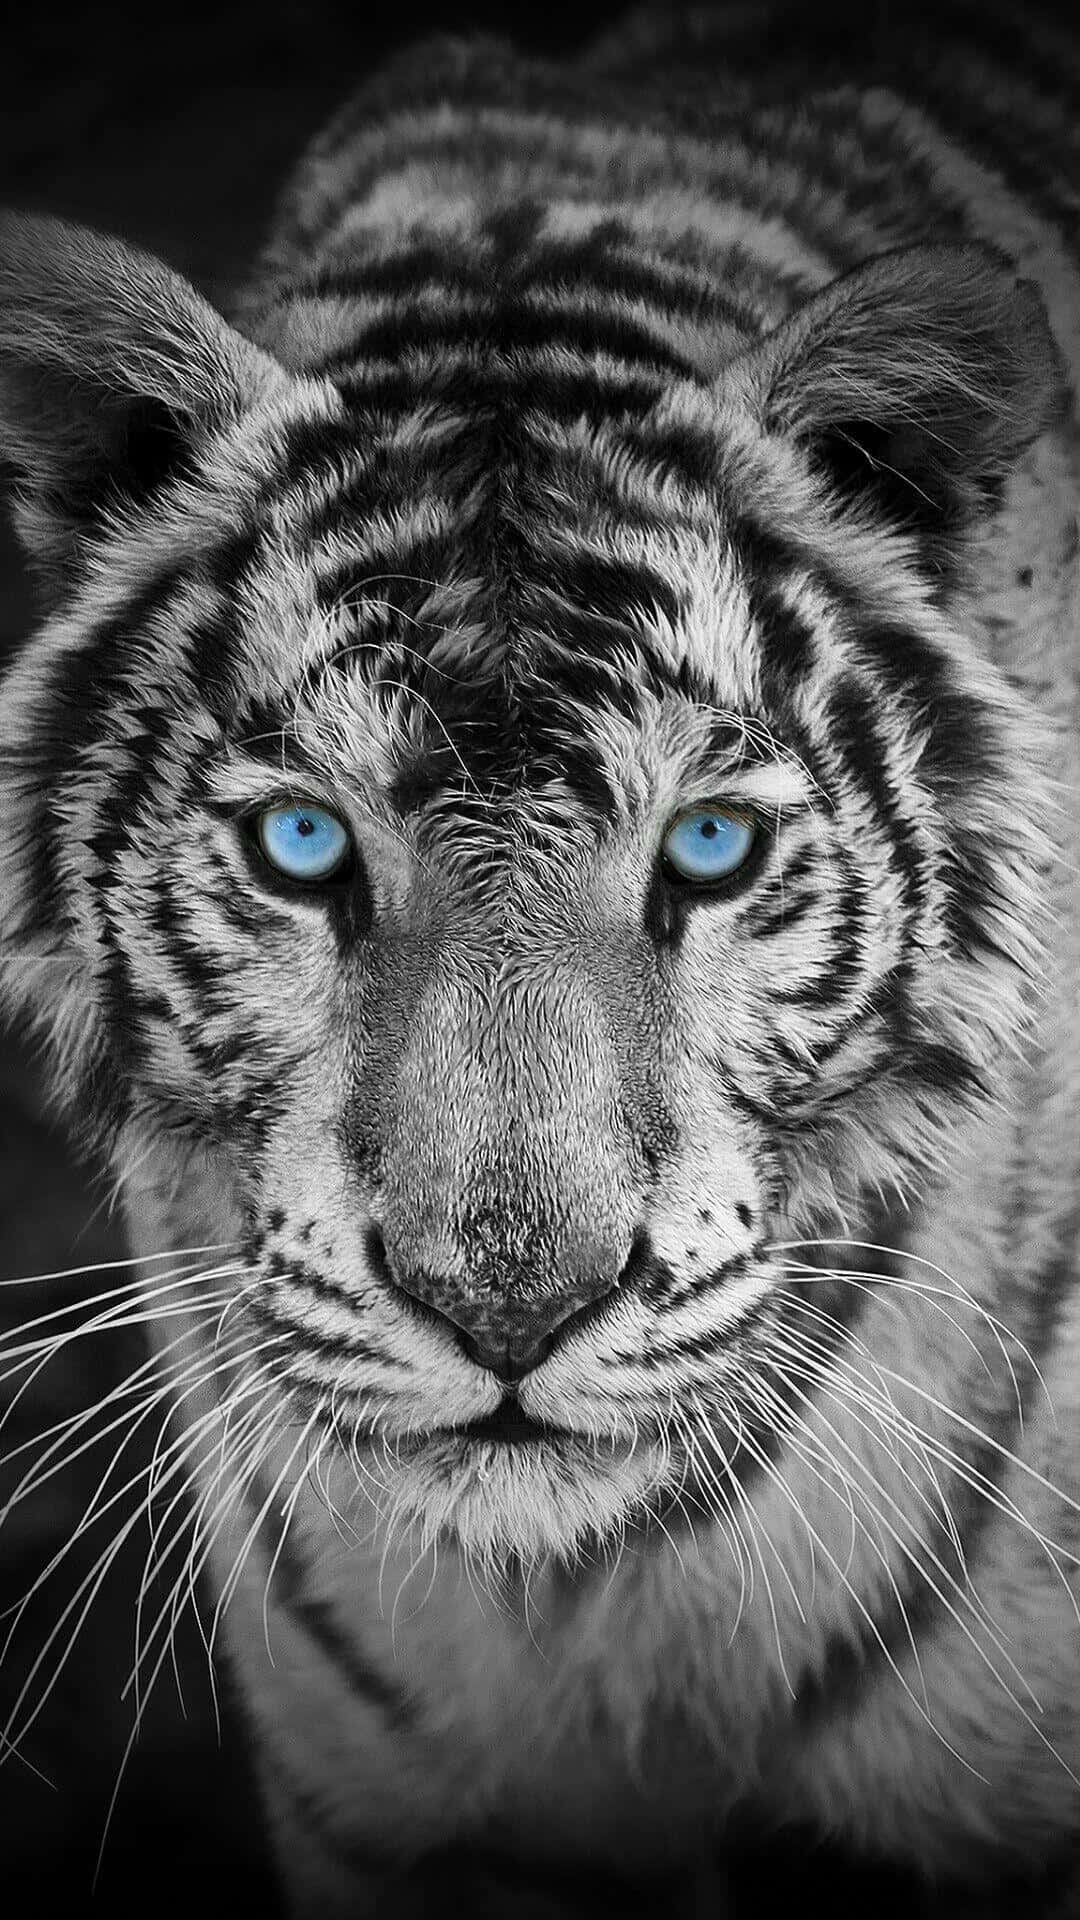 A White Tiger With Blue Eyes In Black And White Wallpaper